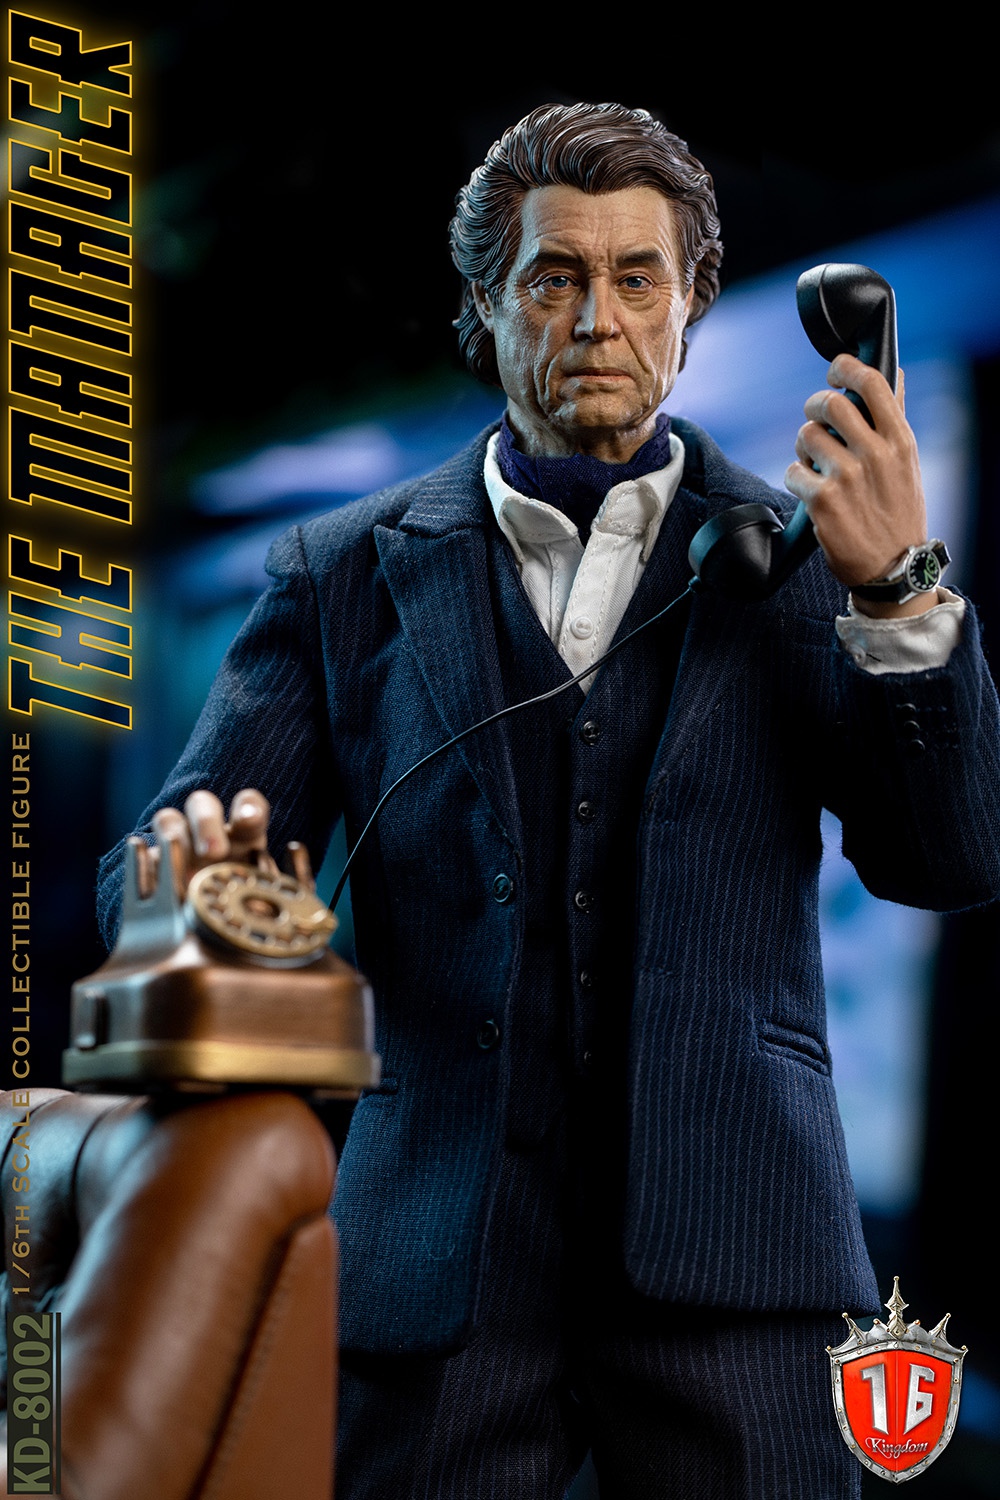 newproduct - NEW PRODUCT: Kingdom: 1/6 The Manager Winston Action Figure KD-8002 11455410